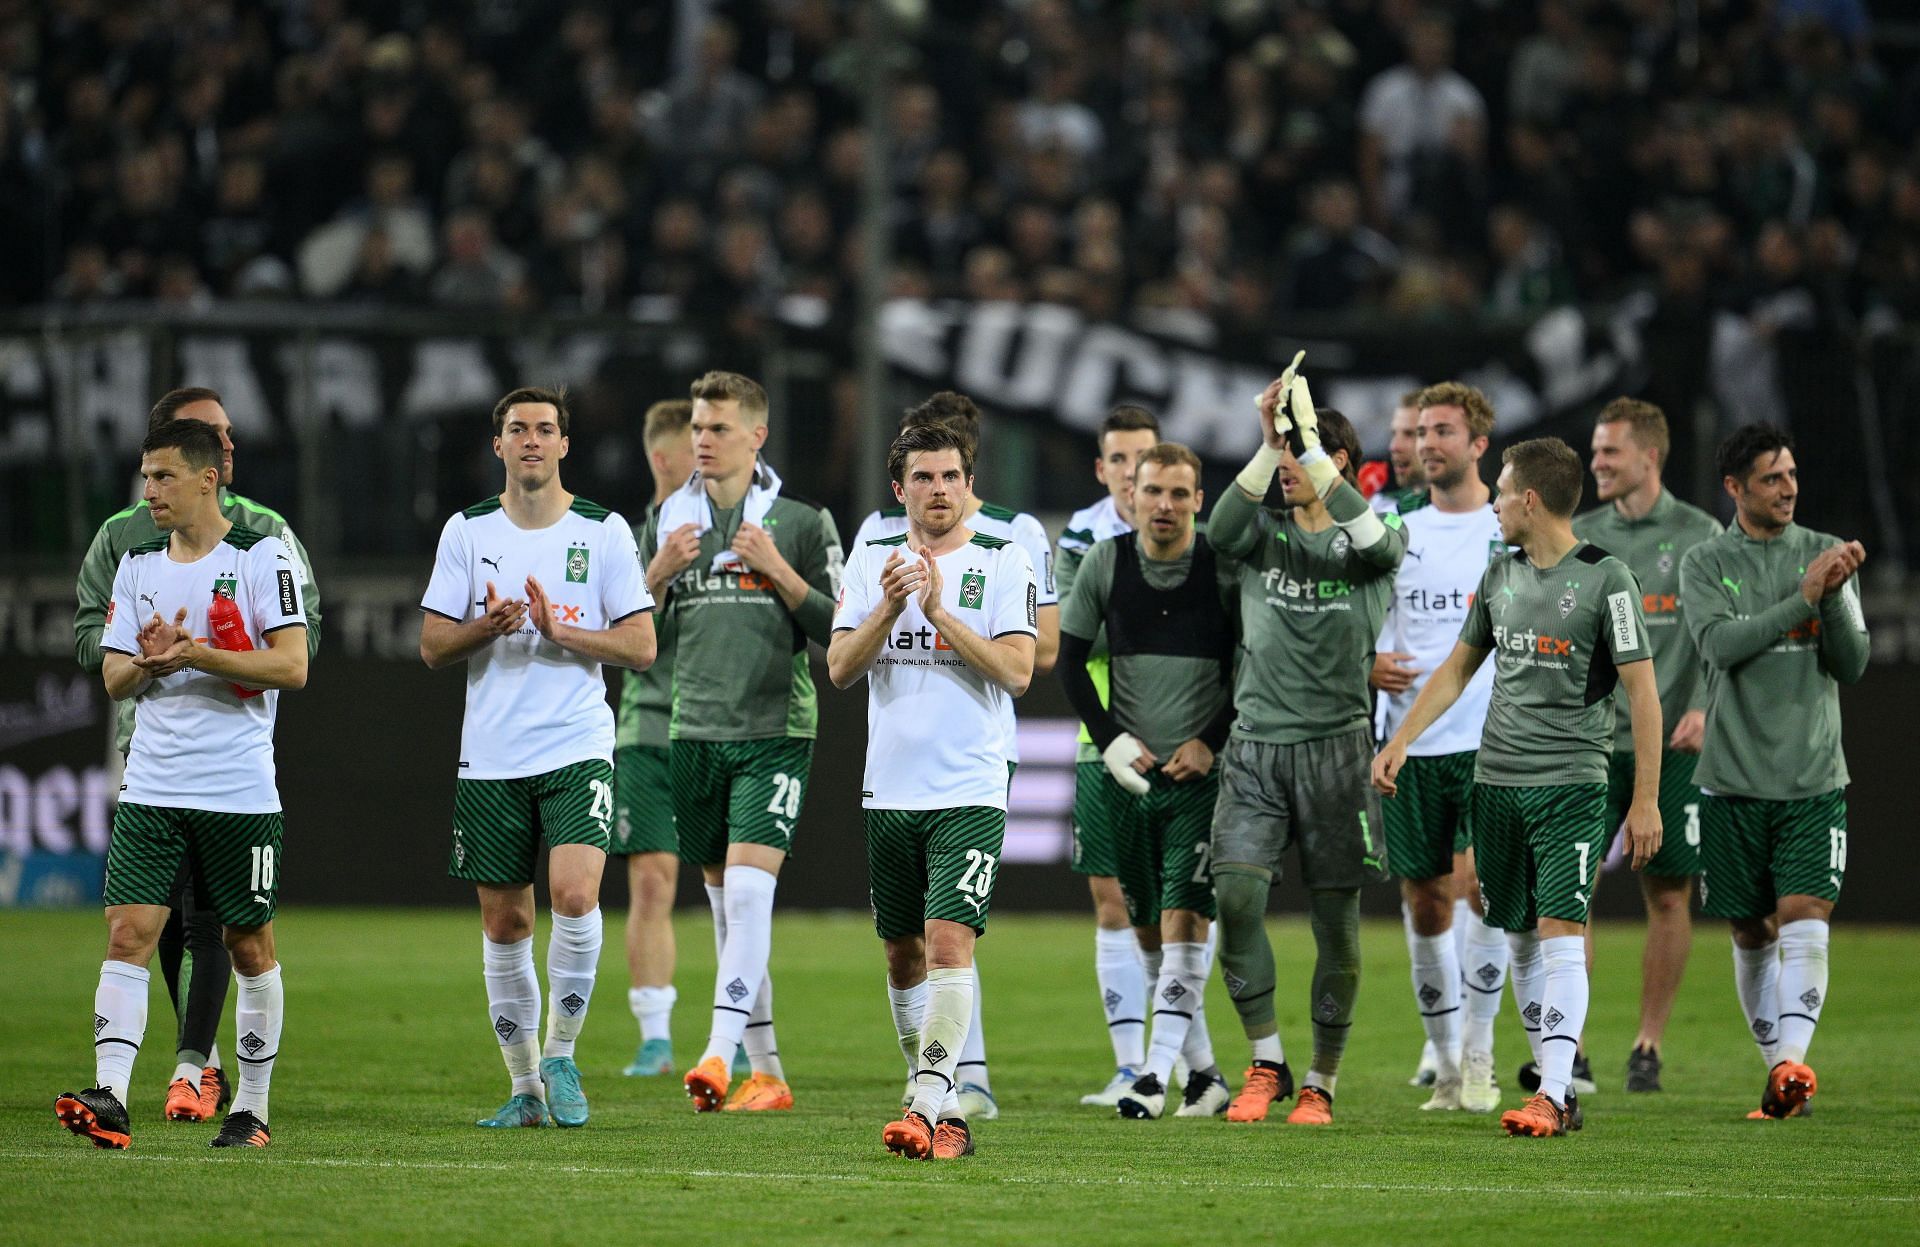 Gladbach will look to finish their season strongly